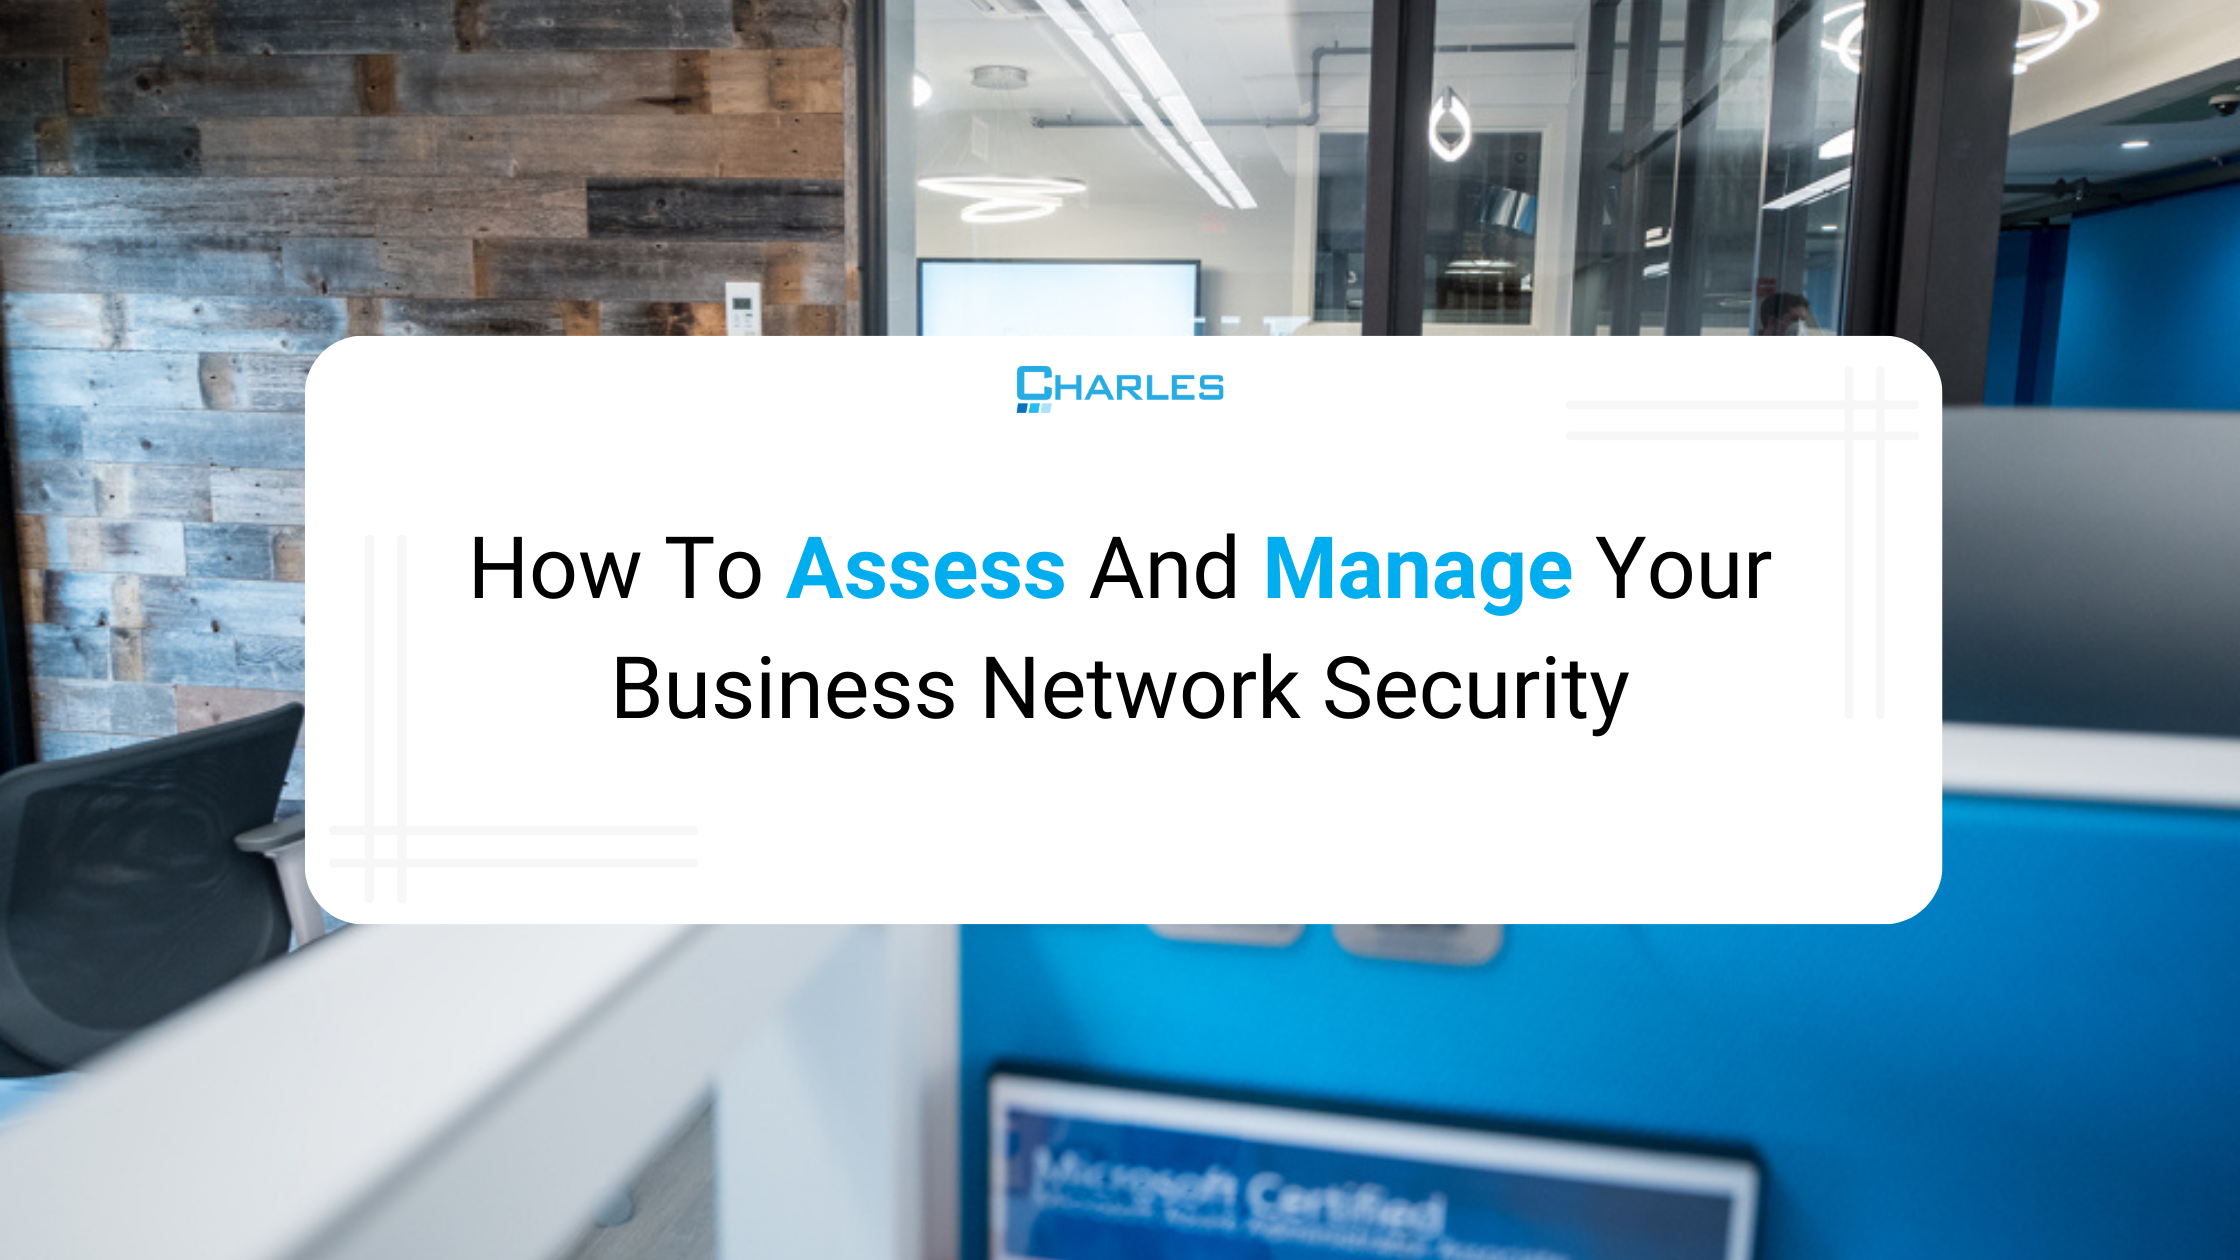 How to Assess and Manage Your Business Network Security